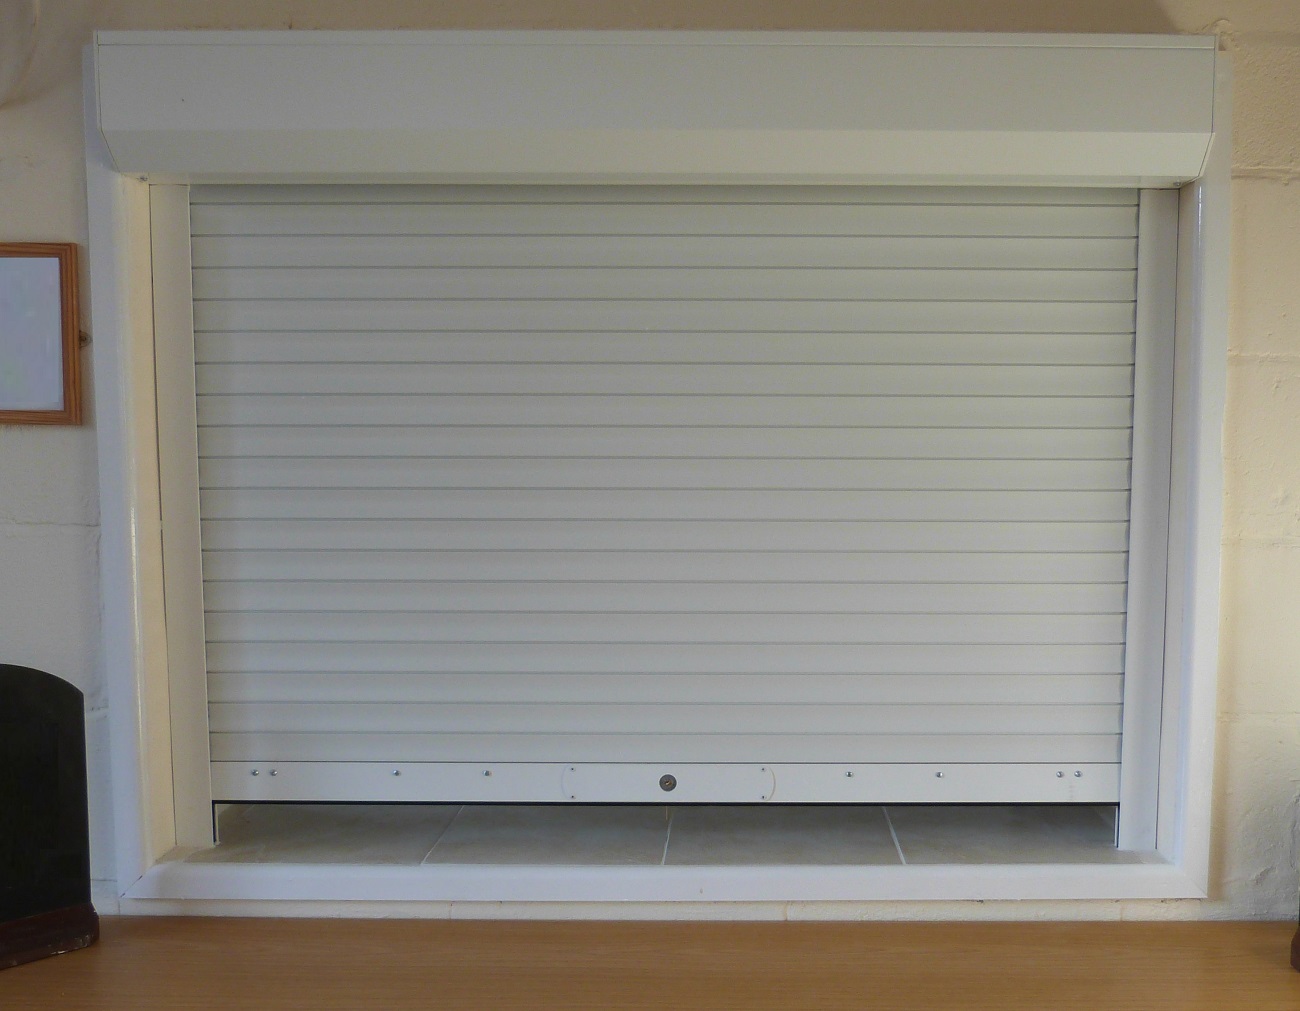 Seceuroshield 38 security shutter fitted to kitchen serving hatch within a village hall located in Surrey.